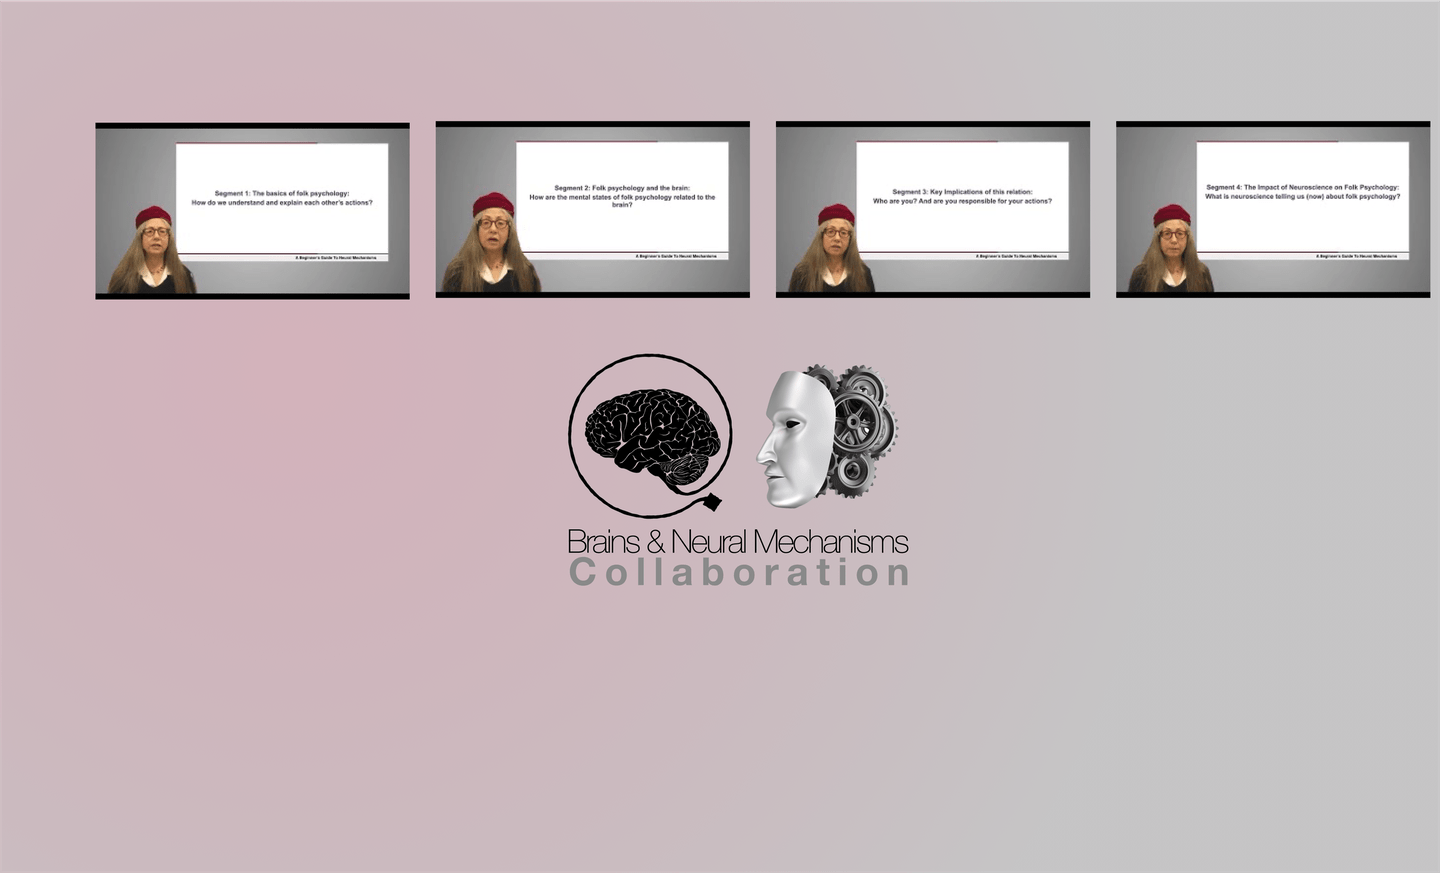 Four Short Videos About Folk Psychology And Brains — Dr. Carrie Figdor